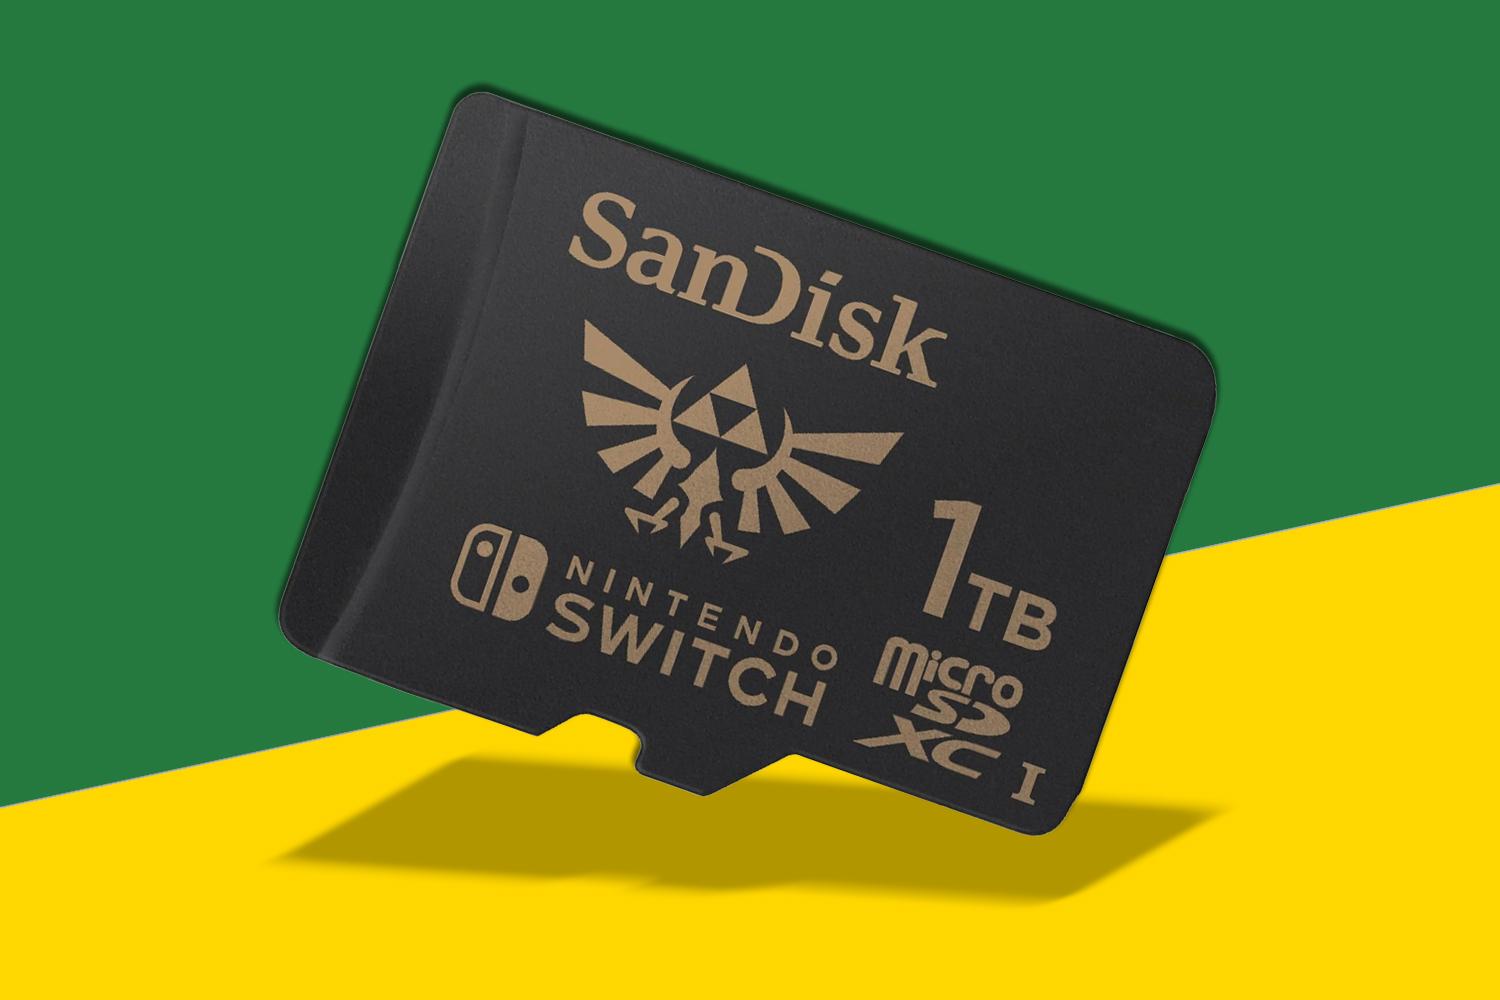 Nintendo Switch fans rejoice: upgrade your storage with SanDisk's